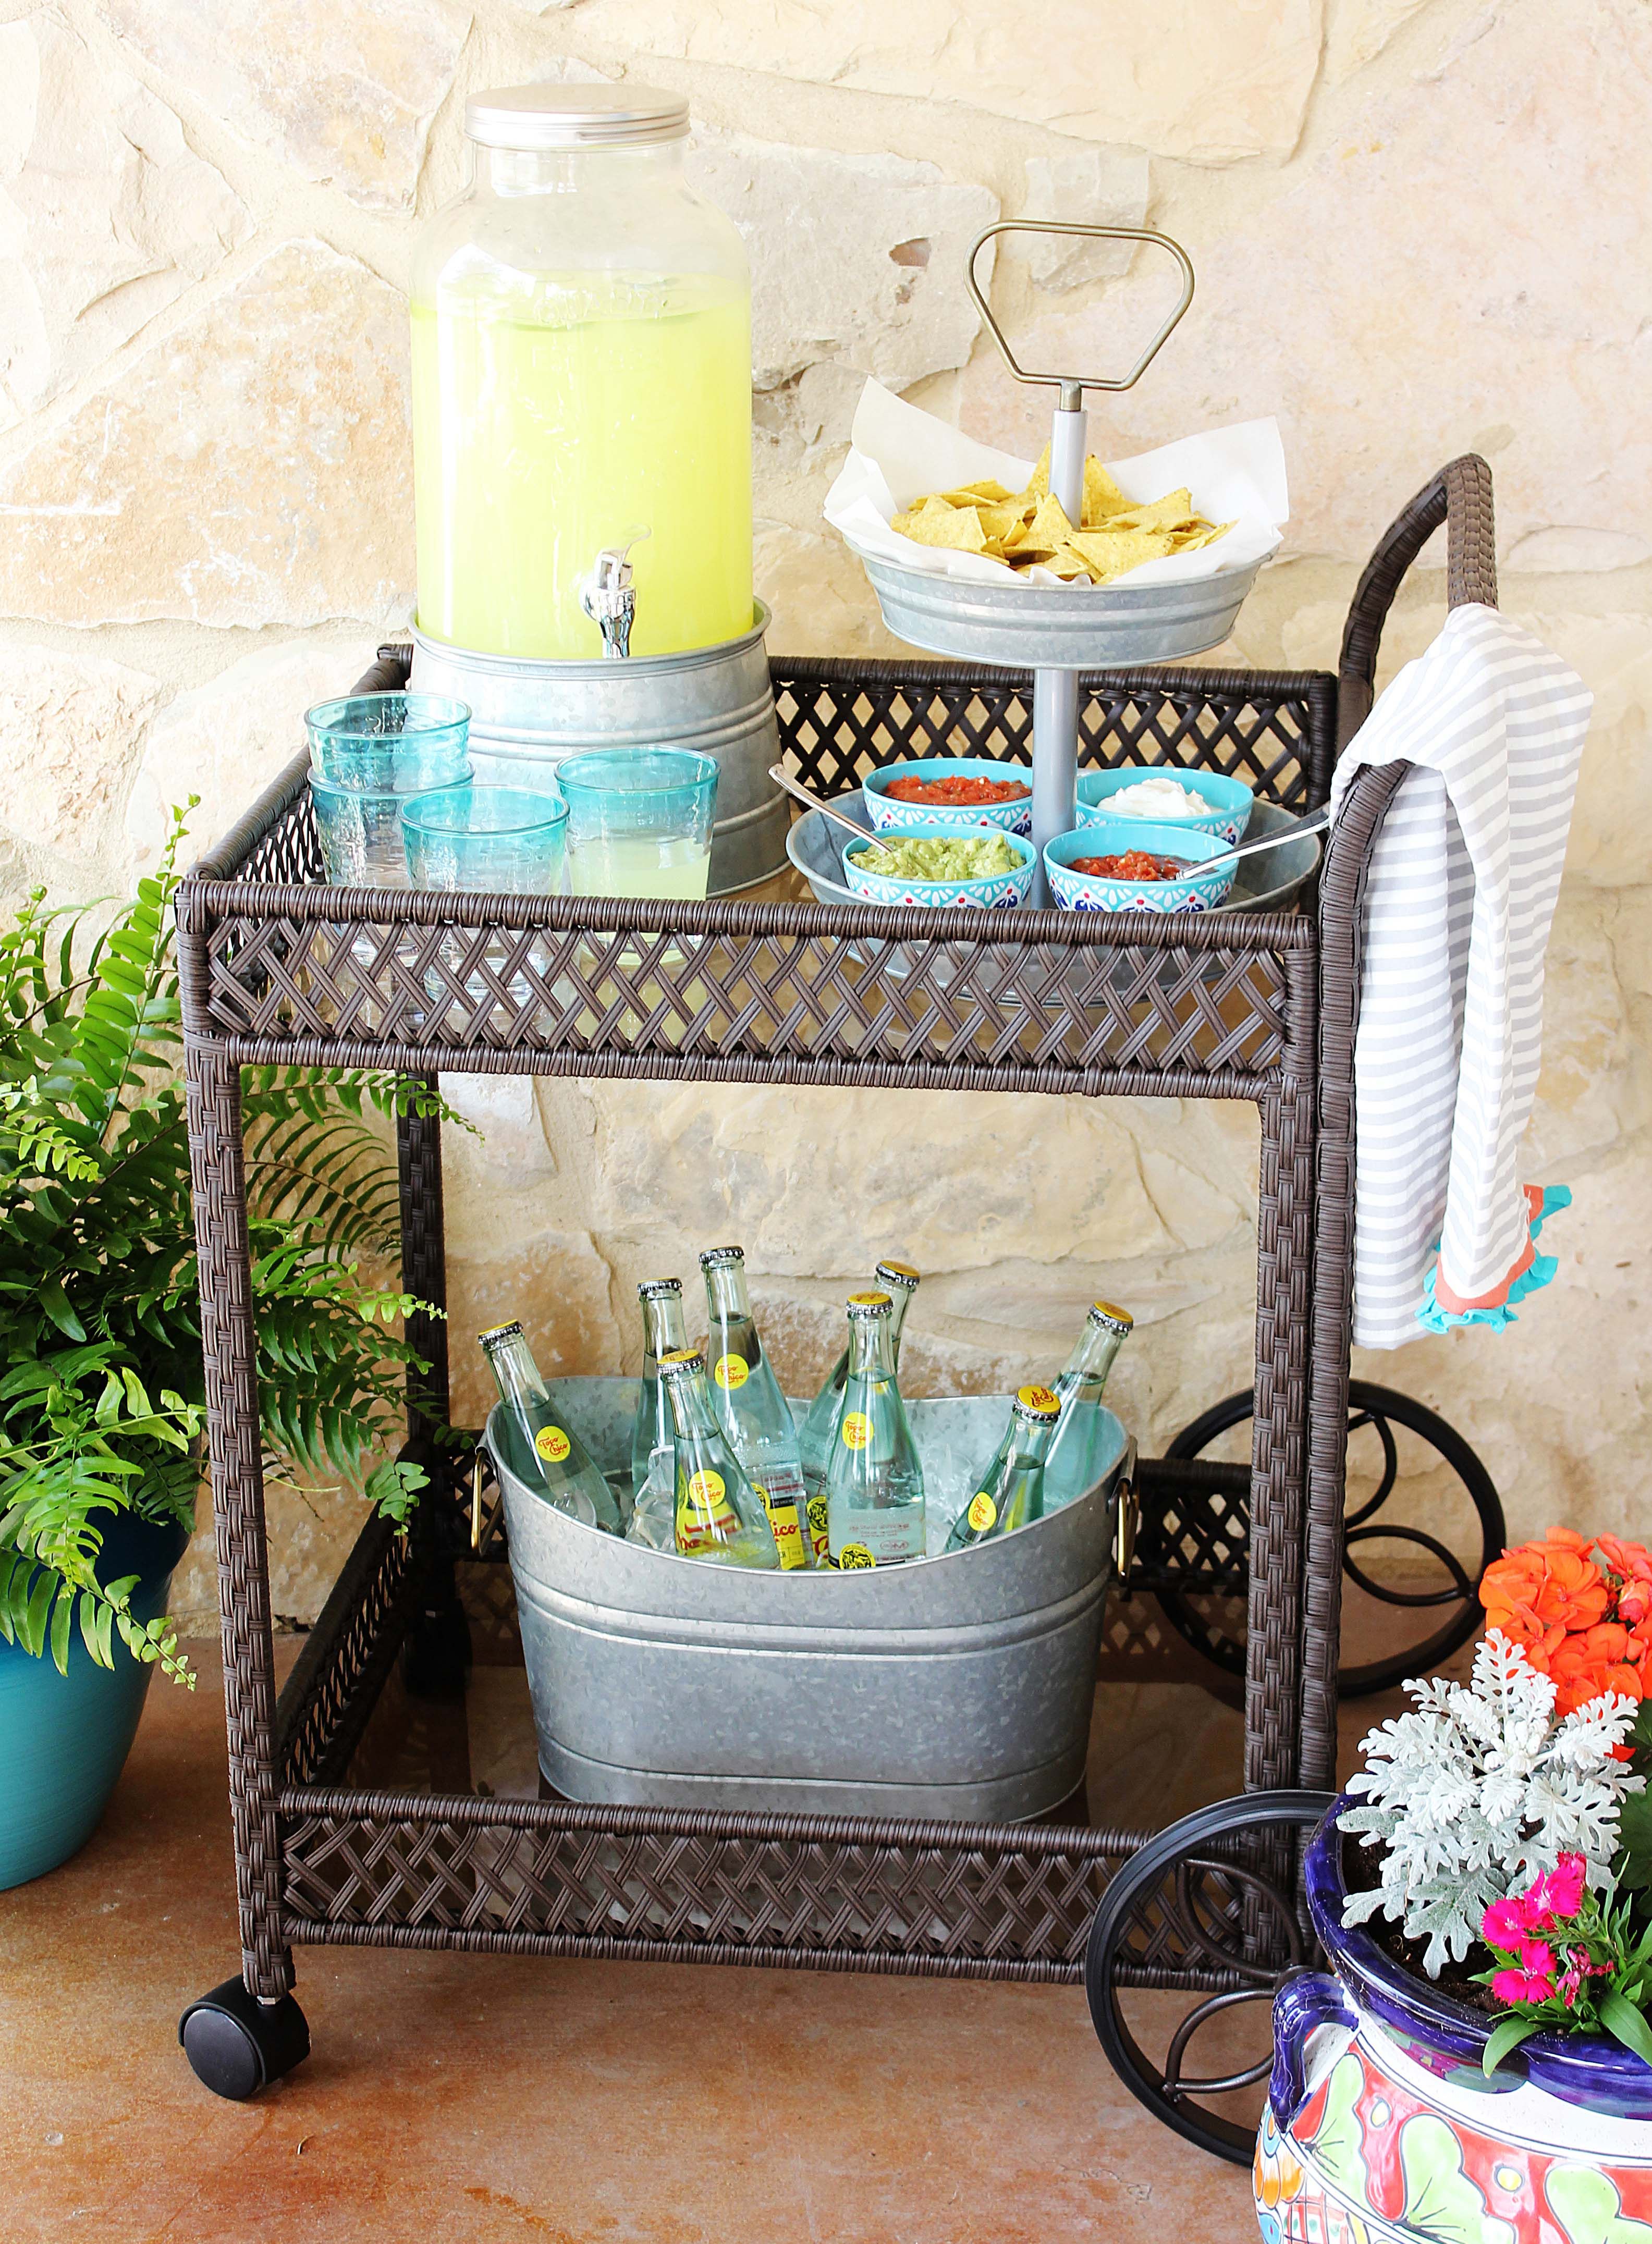 Sturdy Wooden Bar Carts For Entertaining Guests